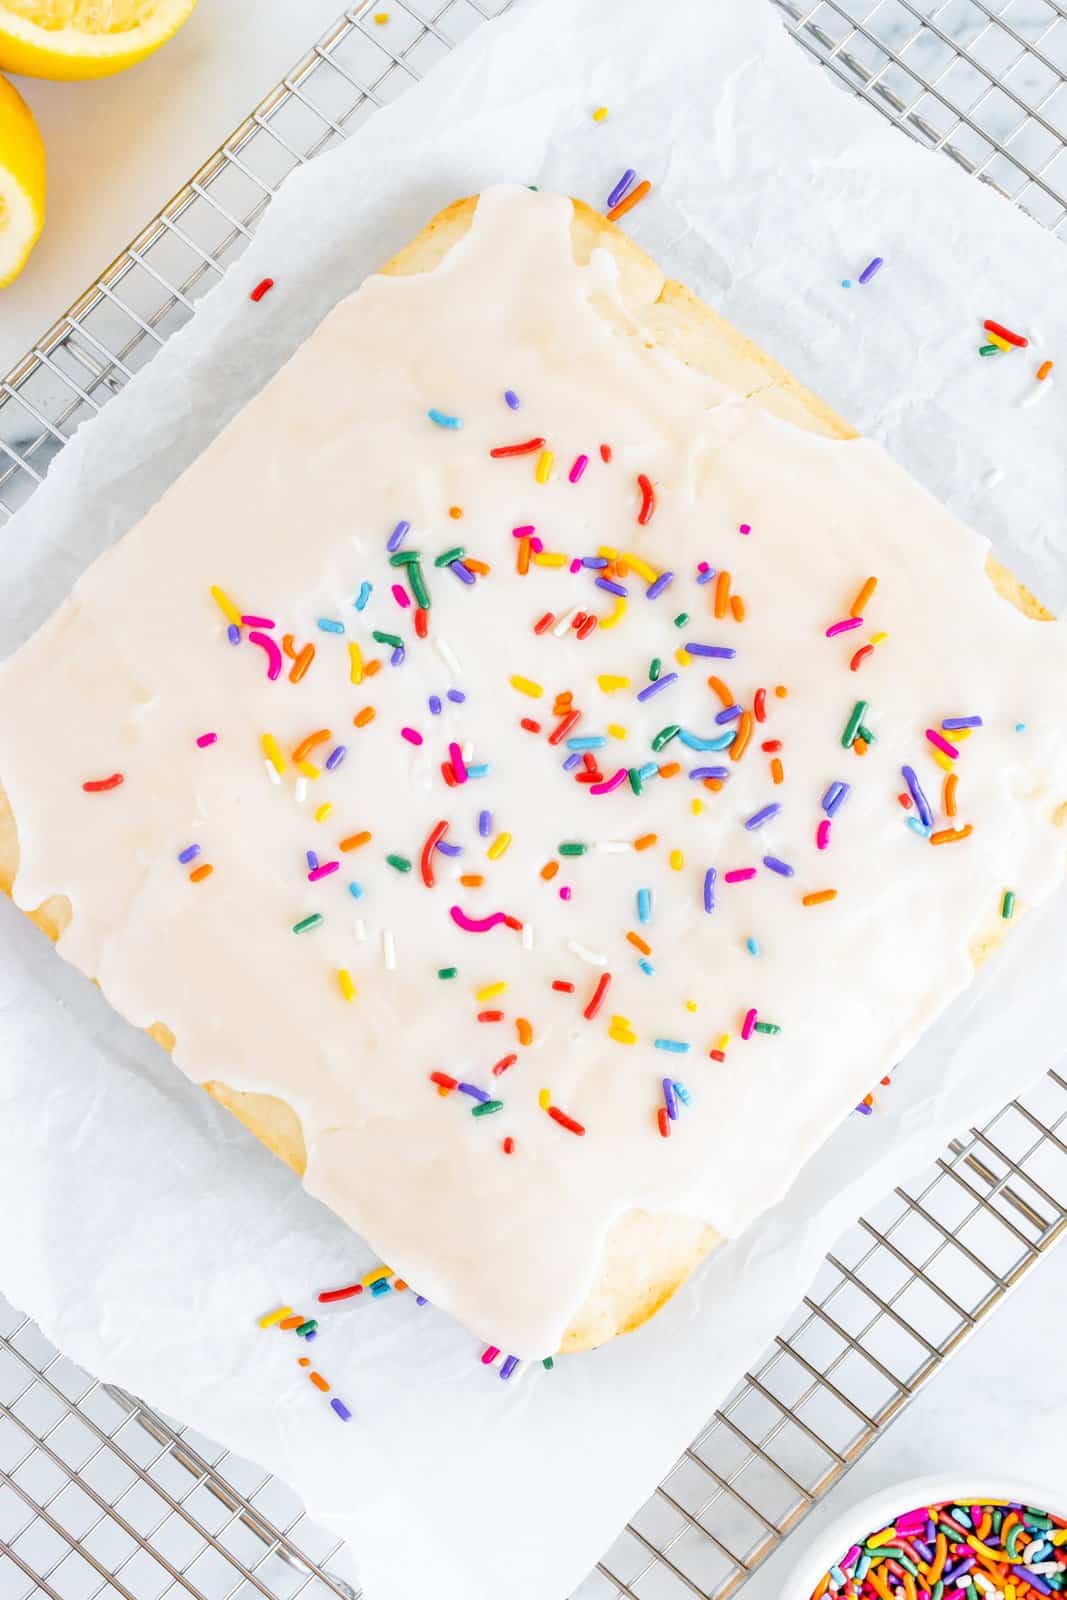 Glaze poured over cake and topped with sprinkles.